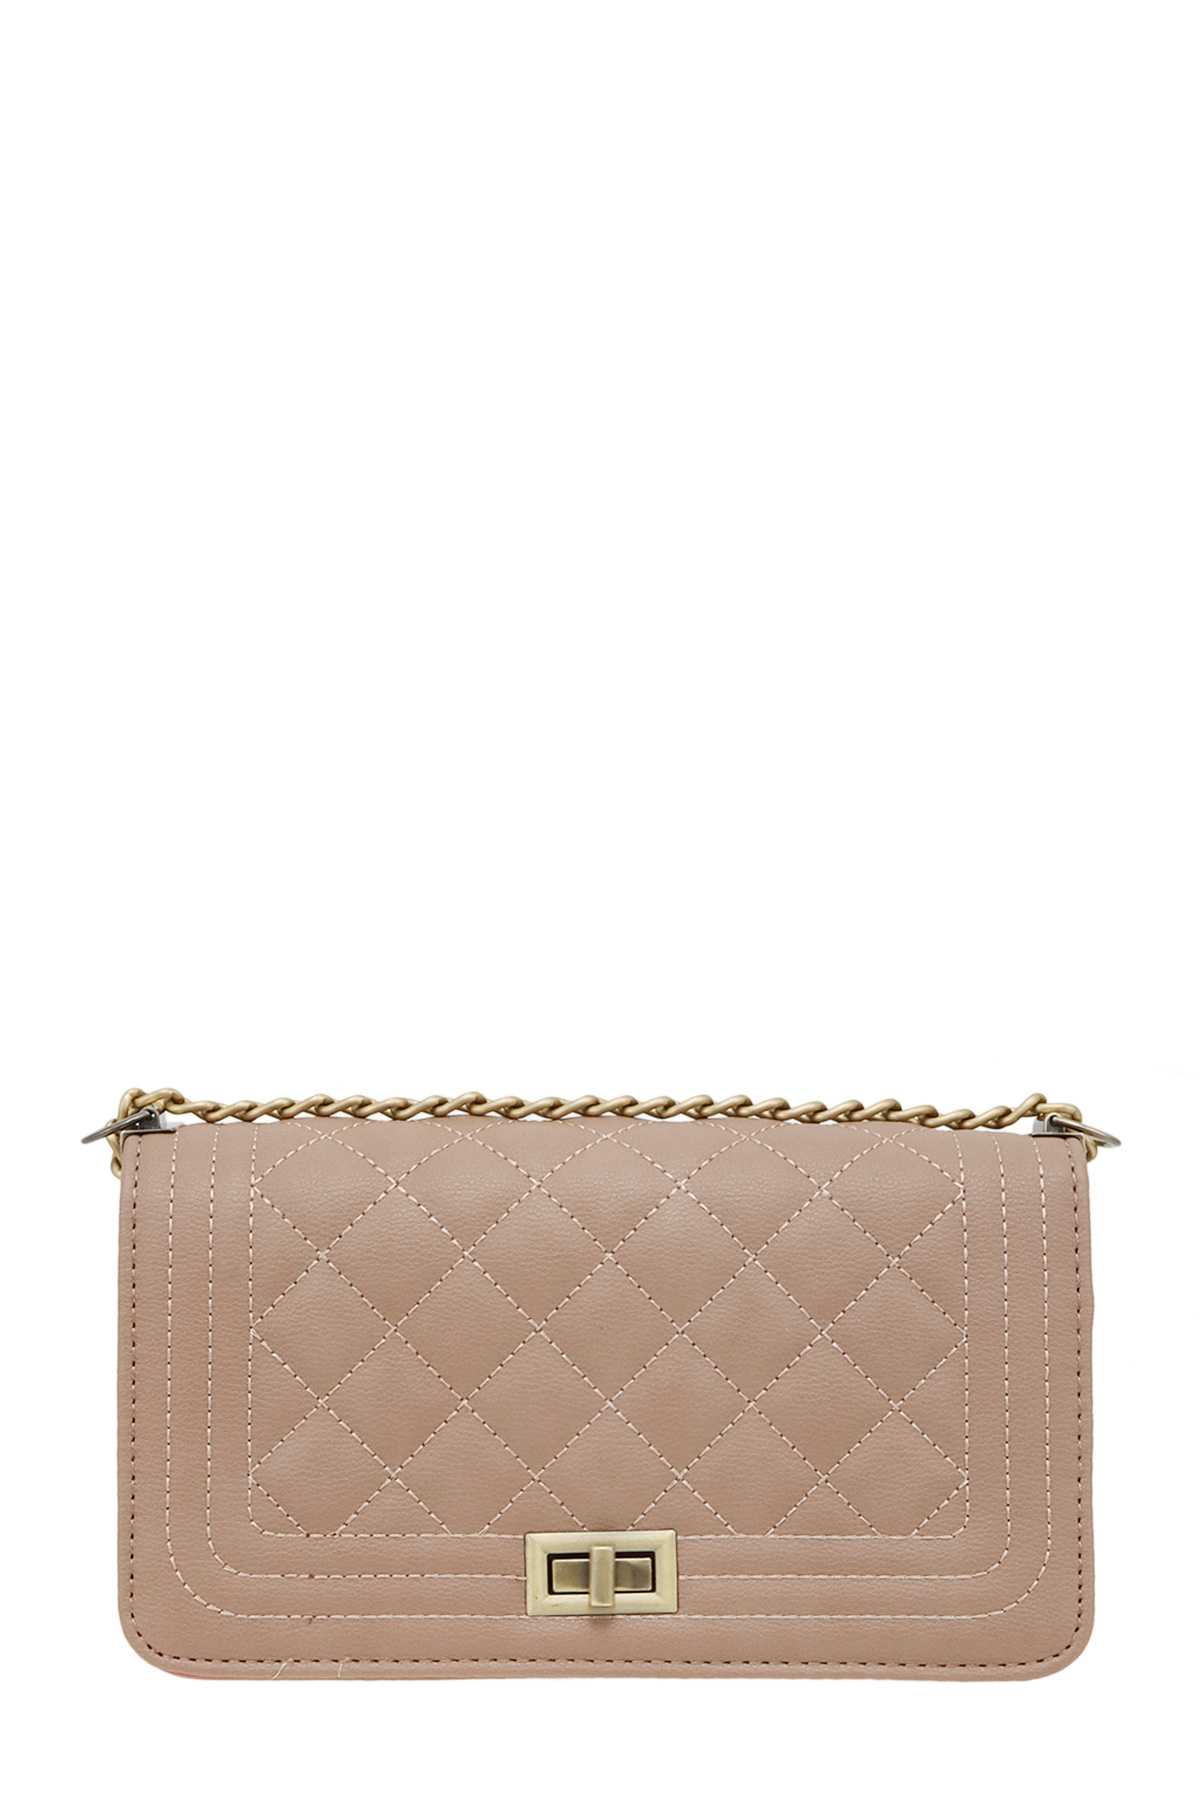 DIAMOND QUILTED SHOULDER BAG WITH BRUSHED CHAIN